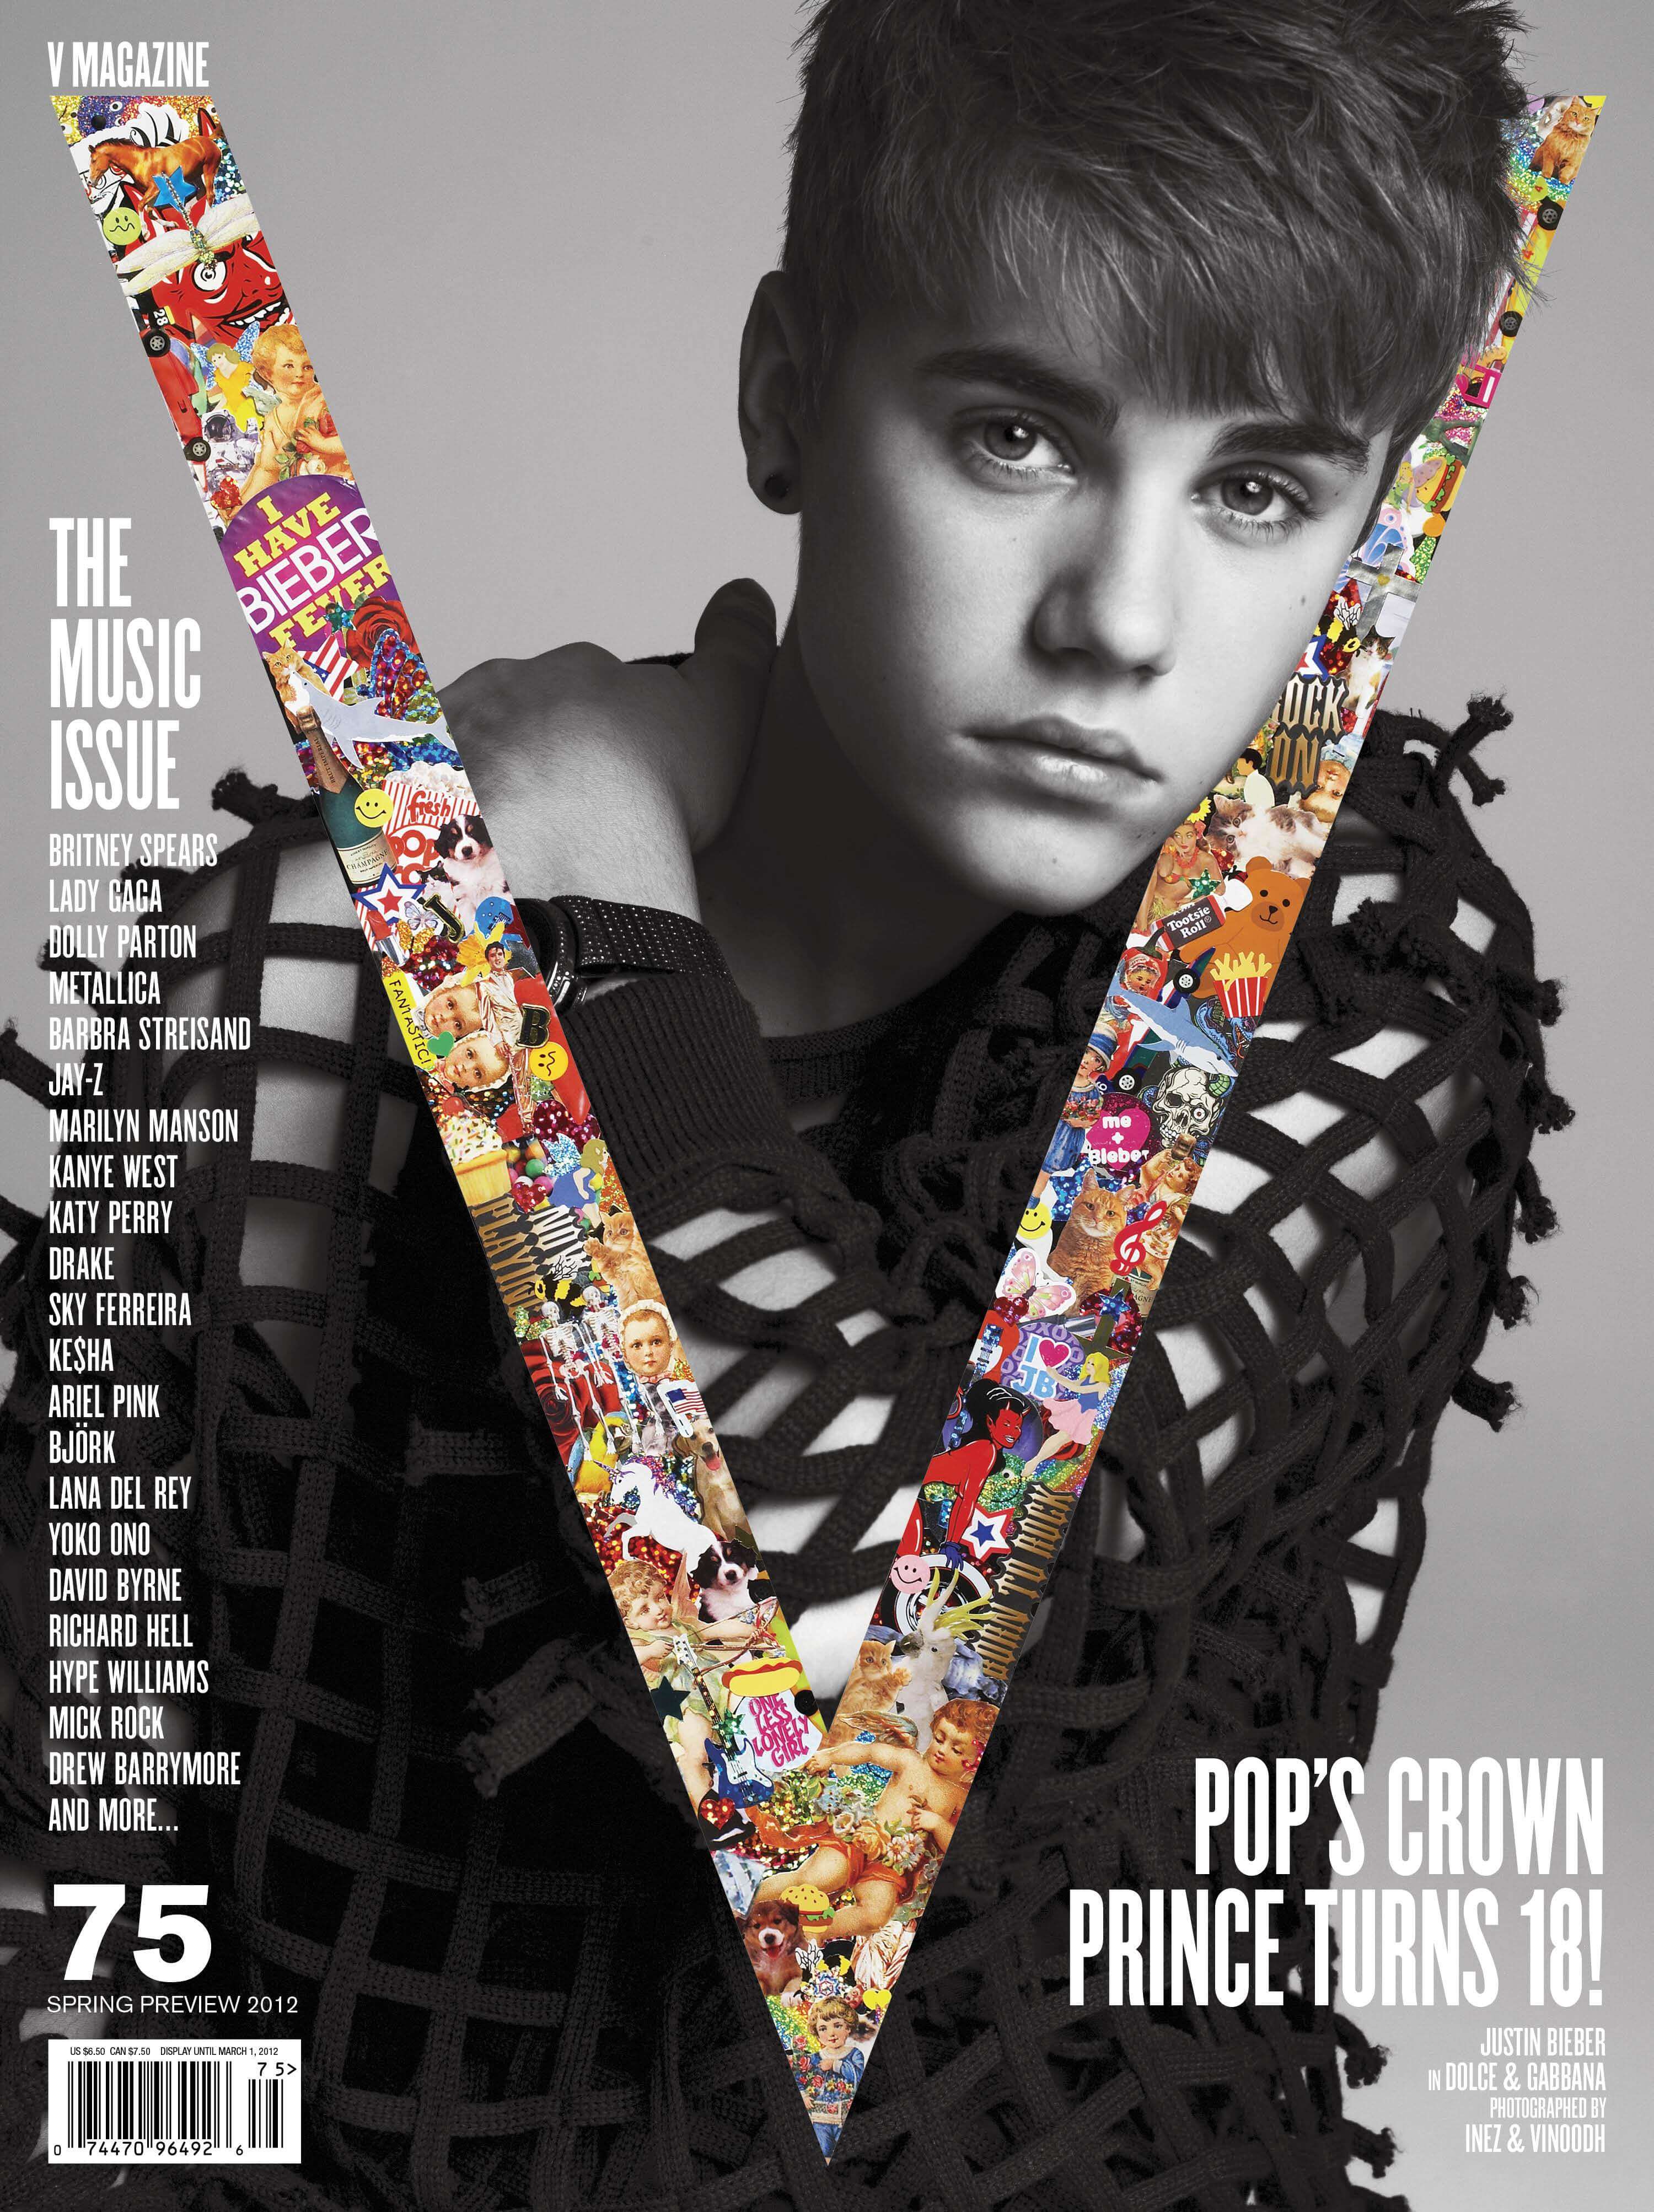 Justin Bieber Cover for V Magazine Issue 75: The Music Issue (Spring Preview 2012)